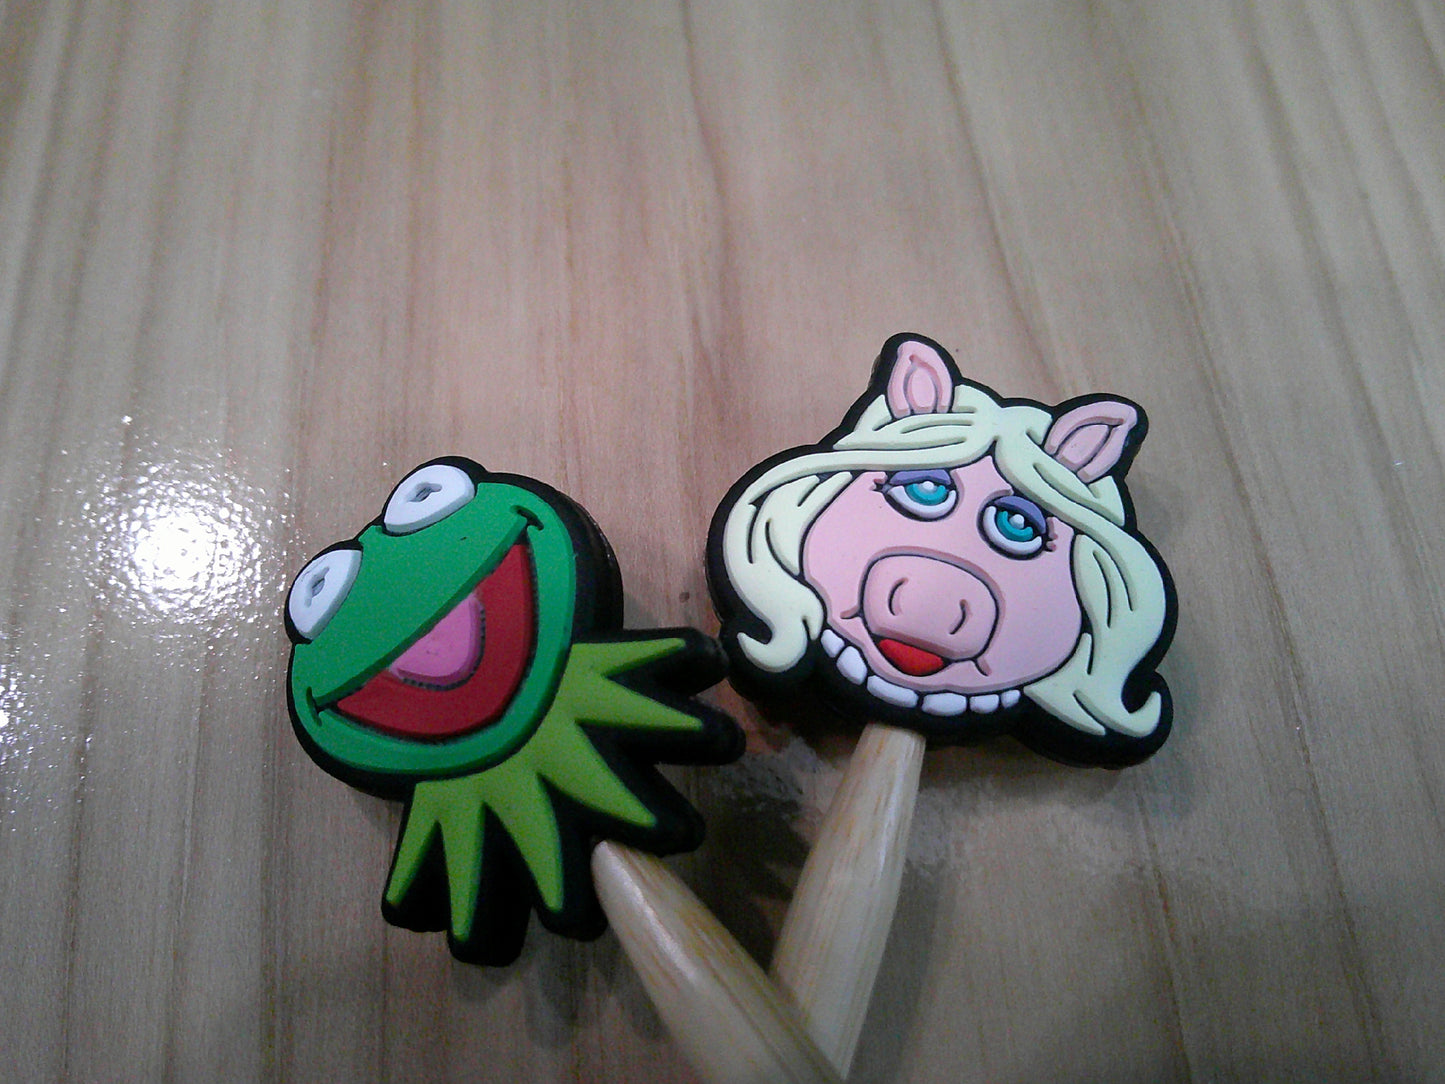 Kermit the frog & Miss Piggy ~ stitch stoppers